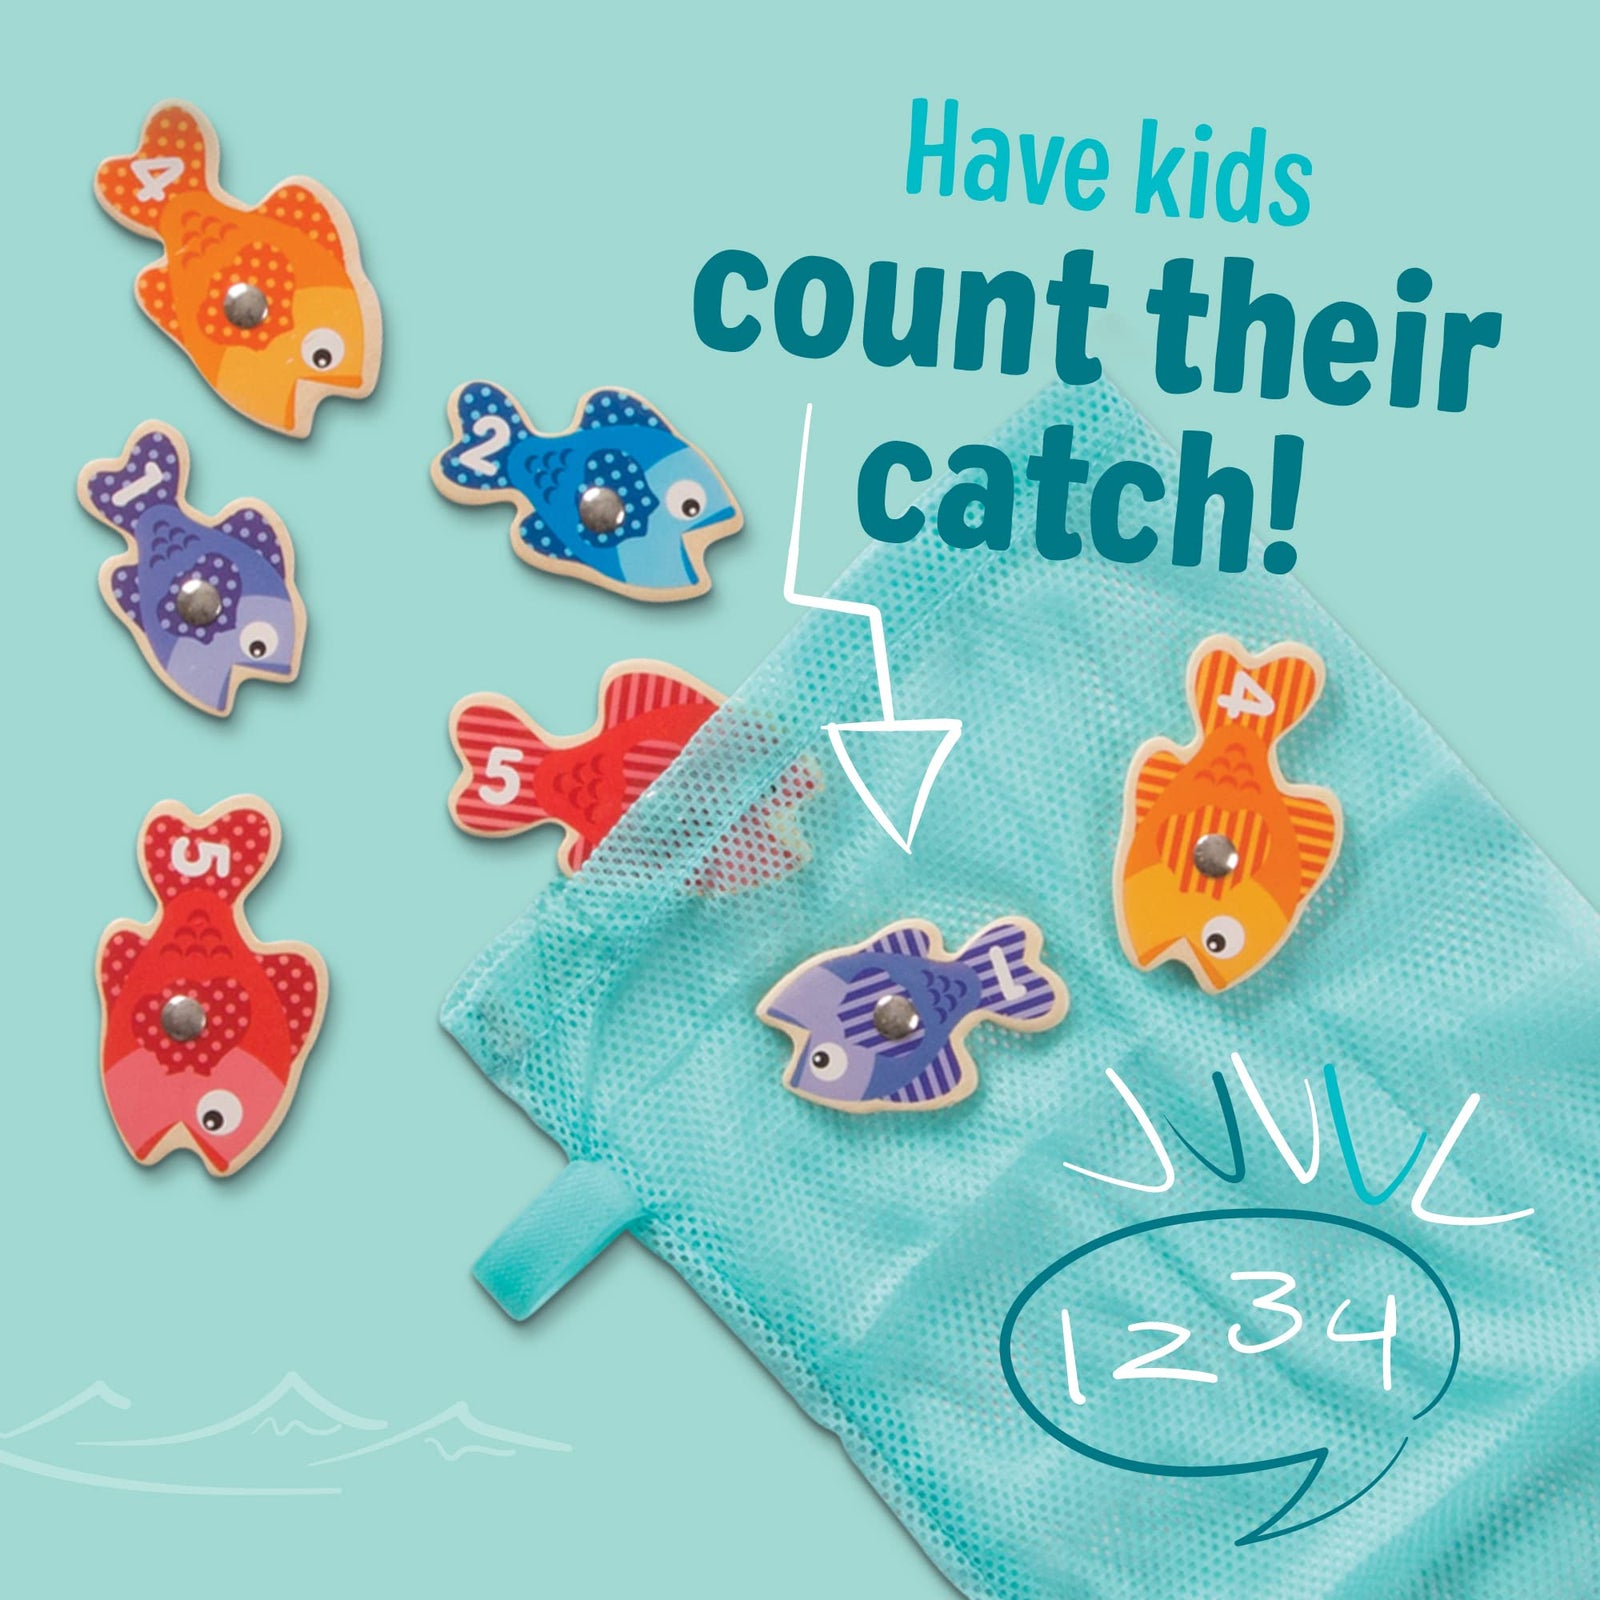 Melissa & Doug Catch &Count Wooden Fishing Game (E-Commerce Packaging)